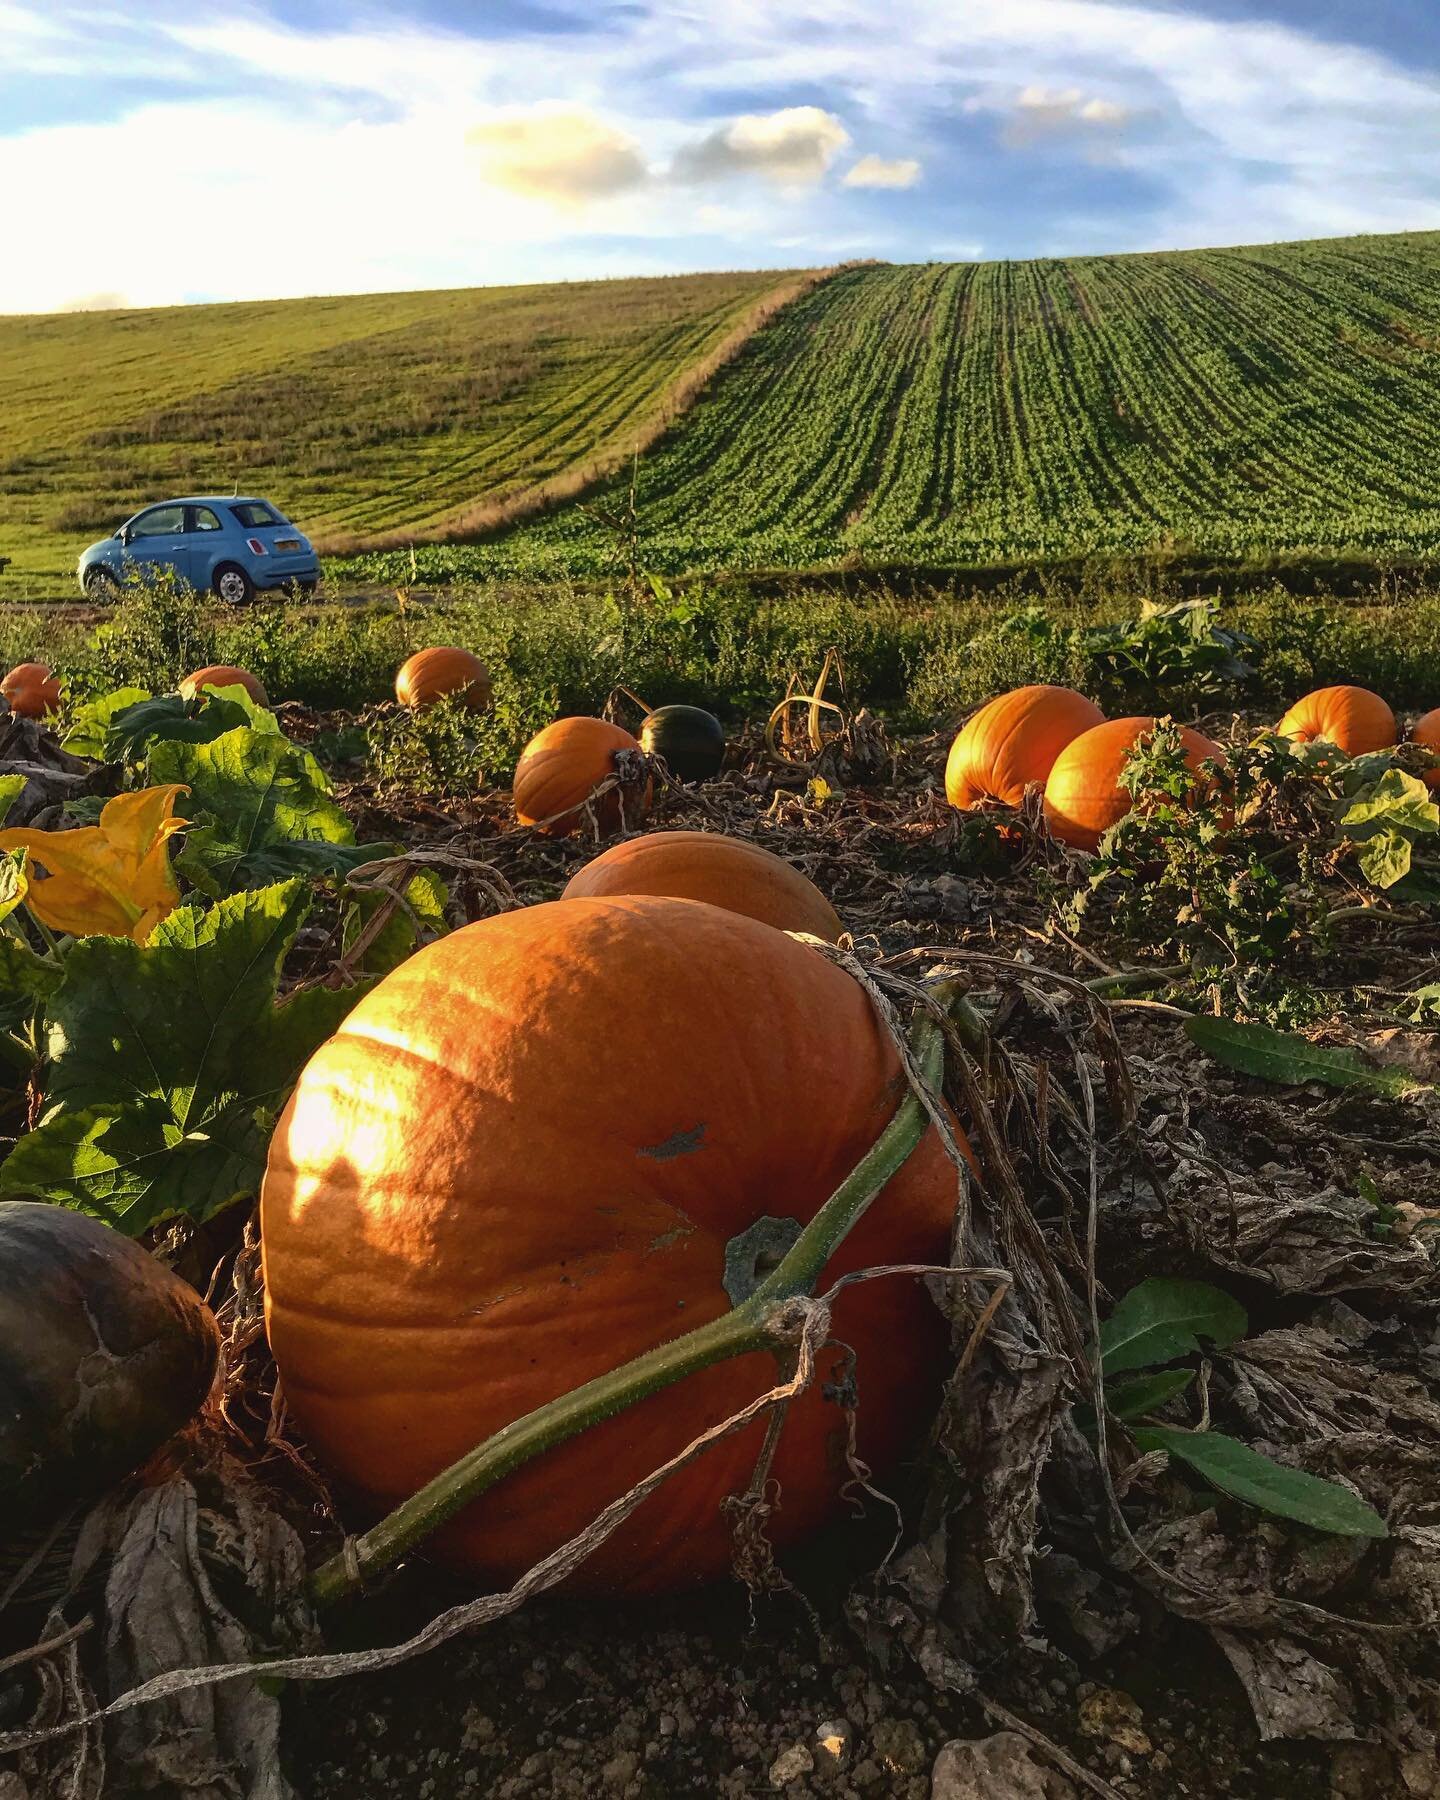 🎃🎃🎃🎃It&rsquo;s that time of year again. Pumpkin picking starts from the 19th of October at South Farm in Rodmell. 🎃🎃🎃🎃#pumpkinpatch #pumpkins #squashes #farm #rural #southdownsway #southdowns #rodmell #countryside #pickyourownfarm #pickyourow